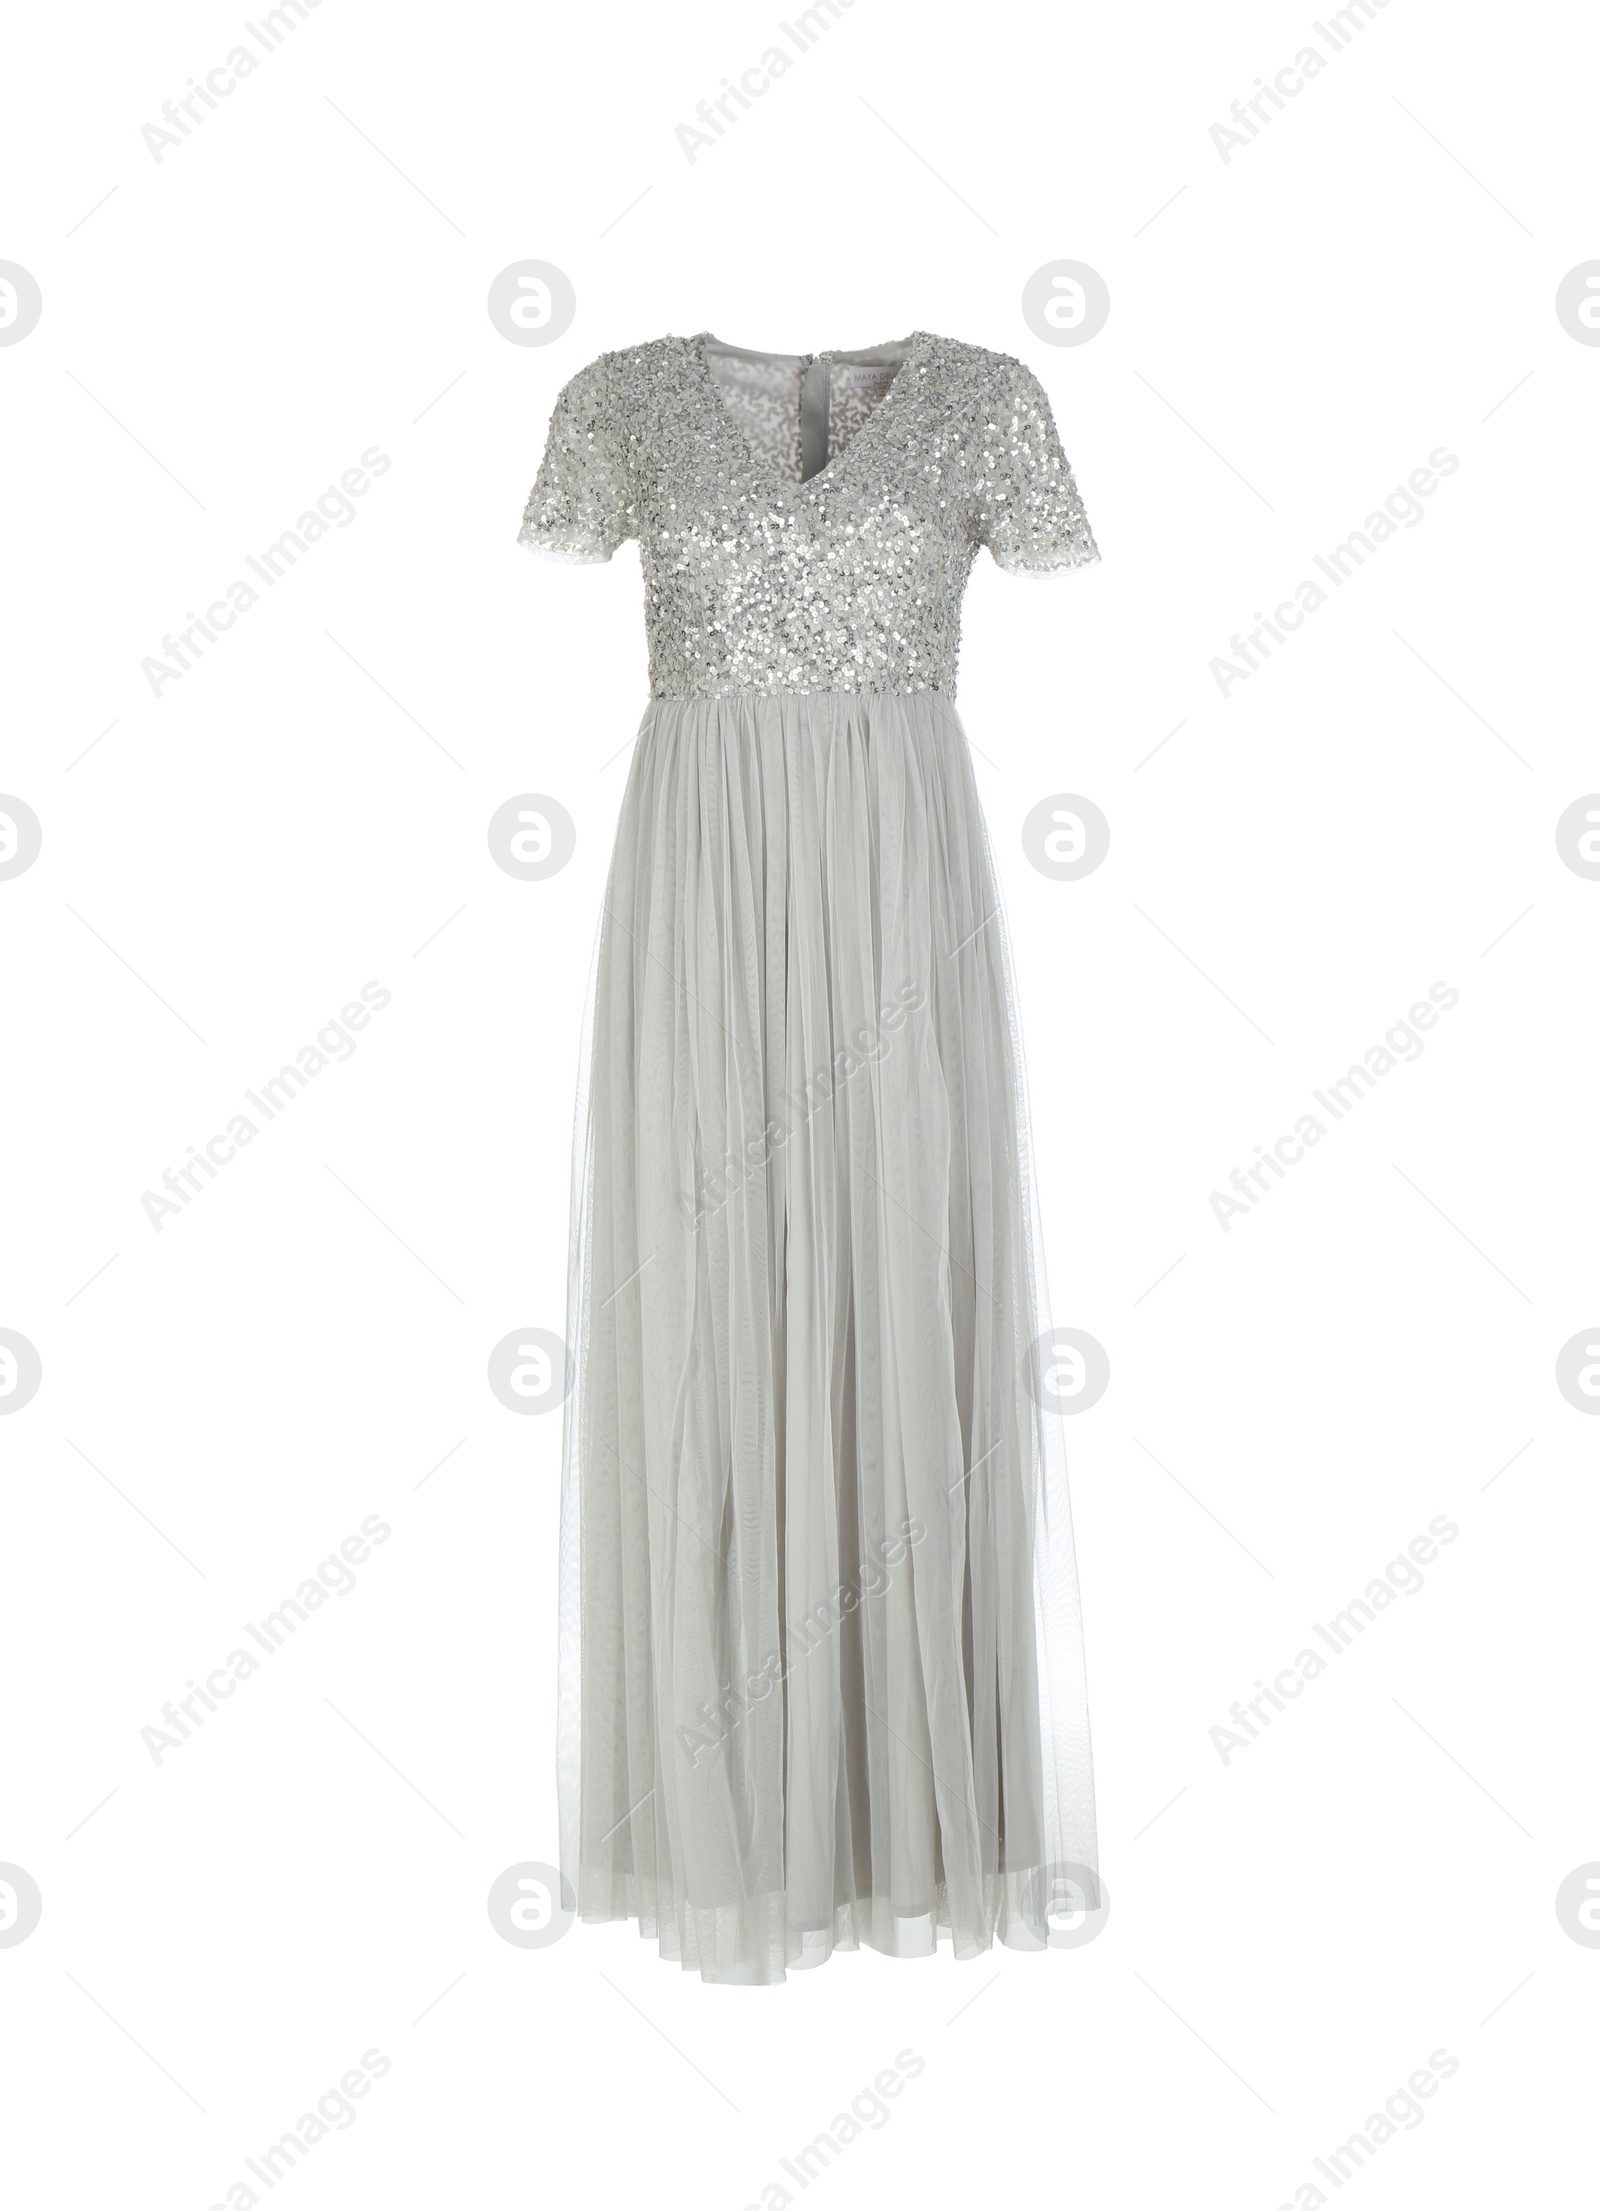 Photo of Elegant grey dress on mannequin against white background. Women's clothes